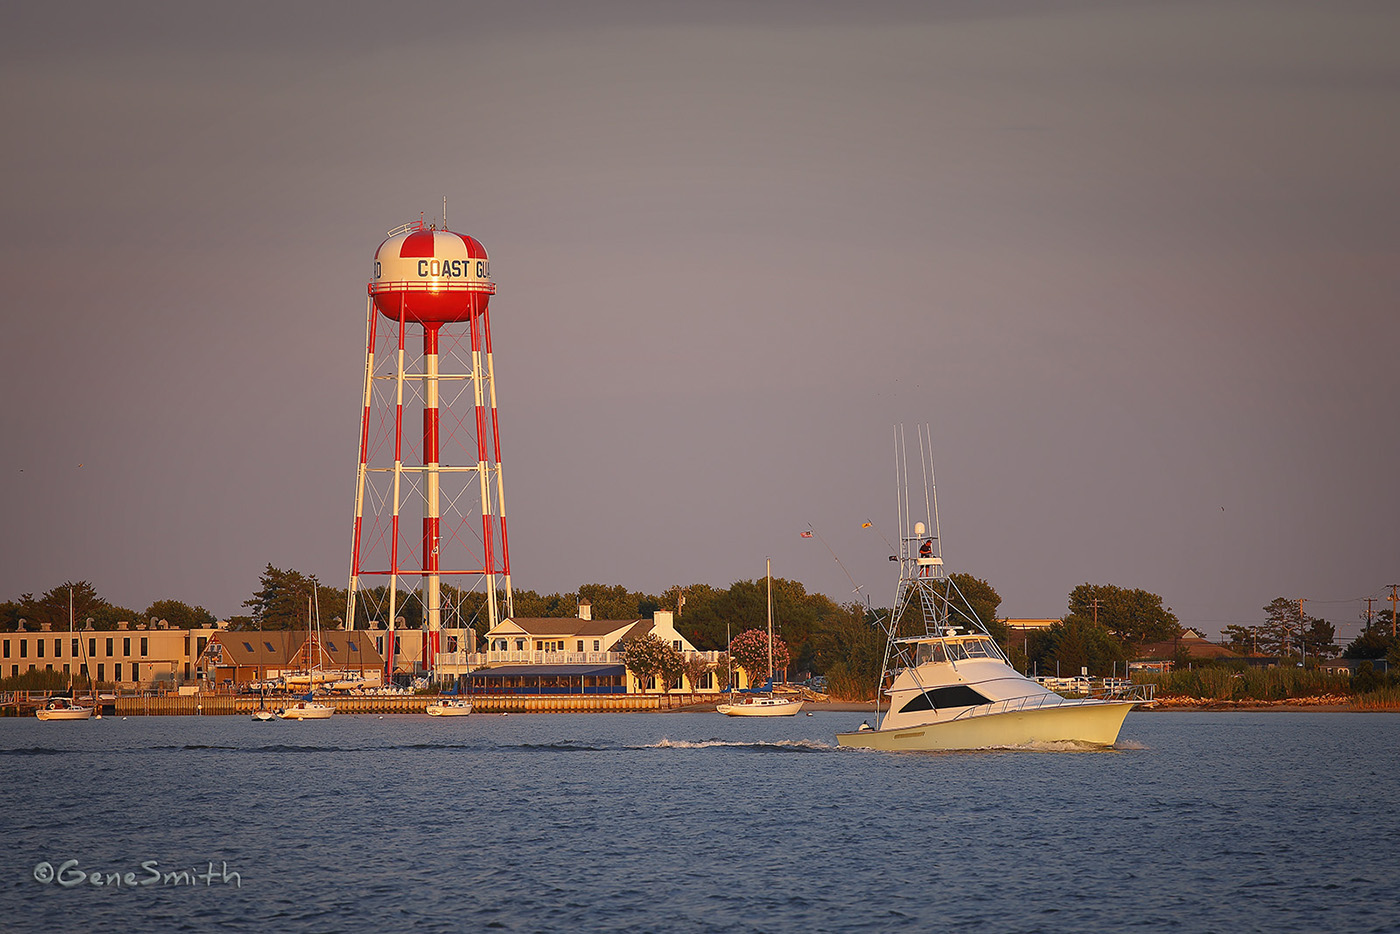 Cape May New Jersey's Corinthian Yacht Club at late afternoon with pastel green Ocean Yacht cruising home to it's berth. The Corinthian Yacht Club is adjacent to the Cape May Coast Guard Station and the Station, Cape May's large water tower recently refinished is painted bright red and white to add visibility to mariners at sea.